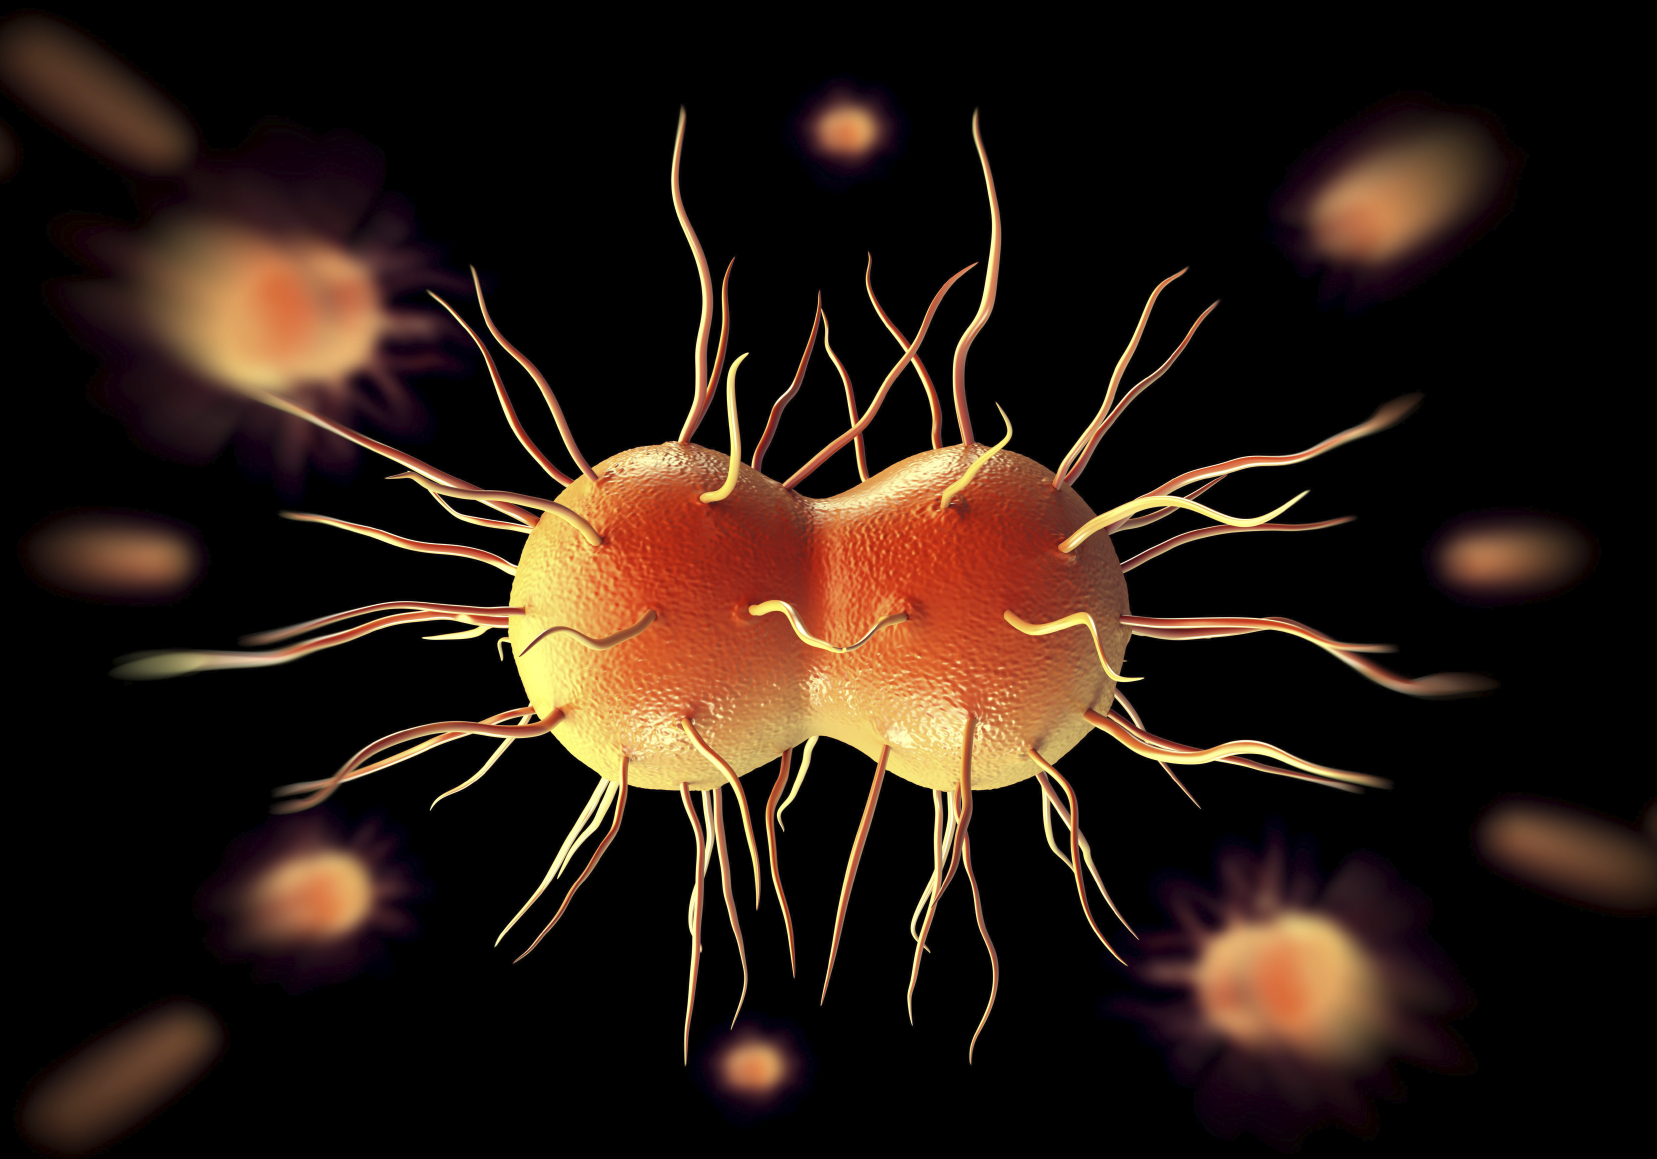 Are Gonorrhea symptoms untreatable now? The STD has apparently mutated in world's first case